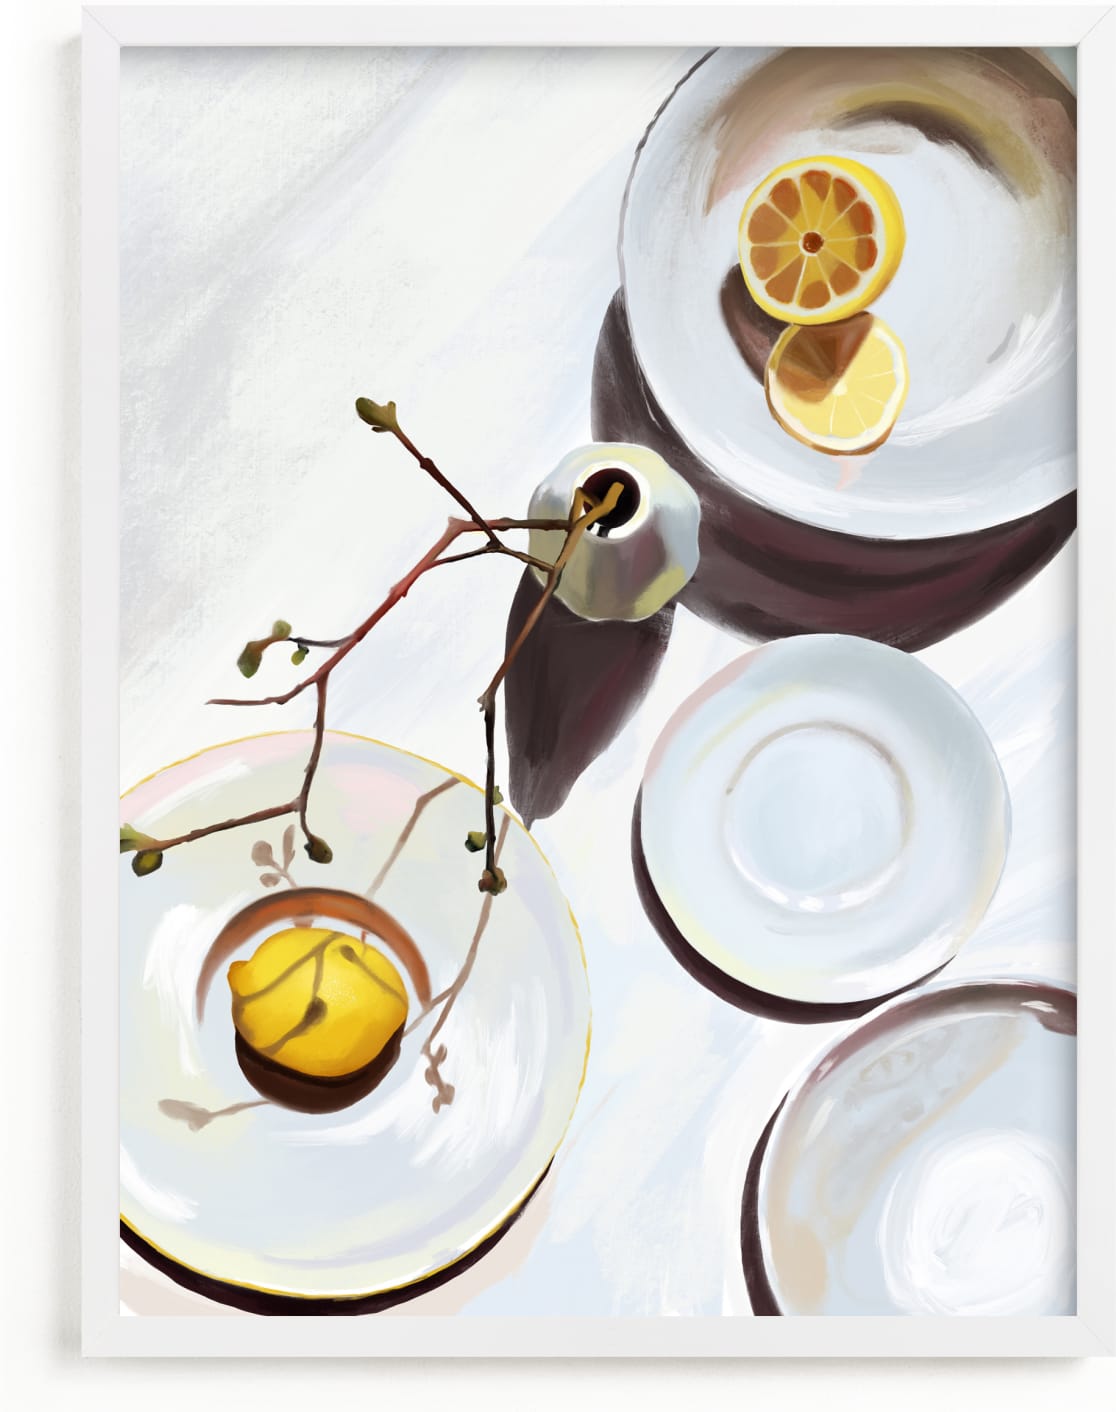 This is a white art by Kinga Subject called Flatlay Lemon Study.